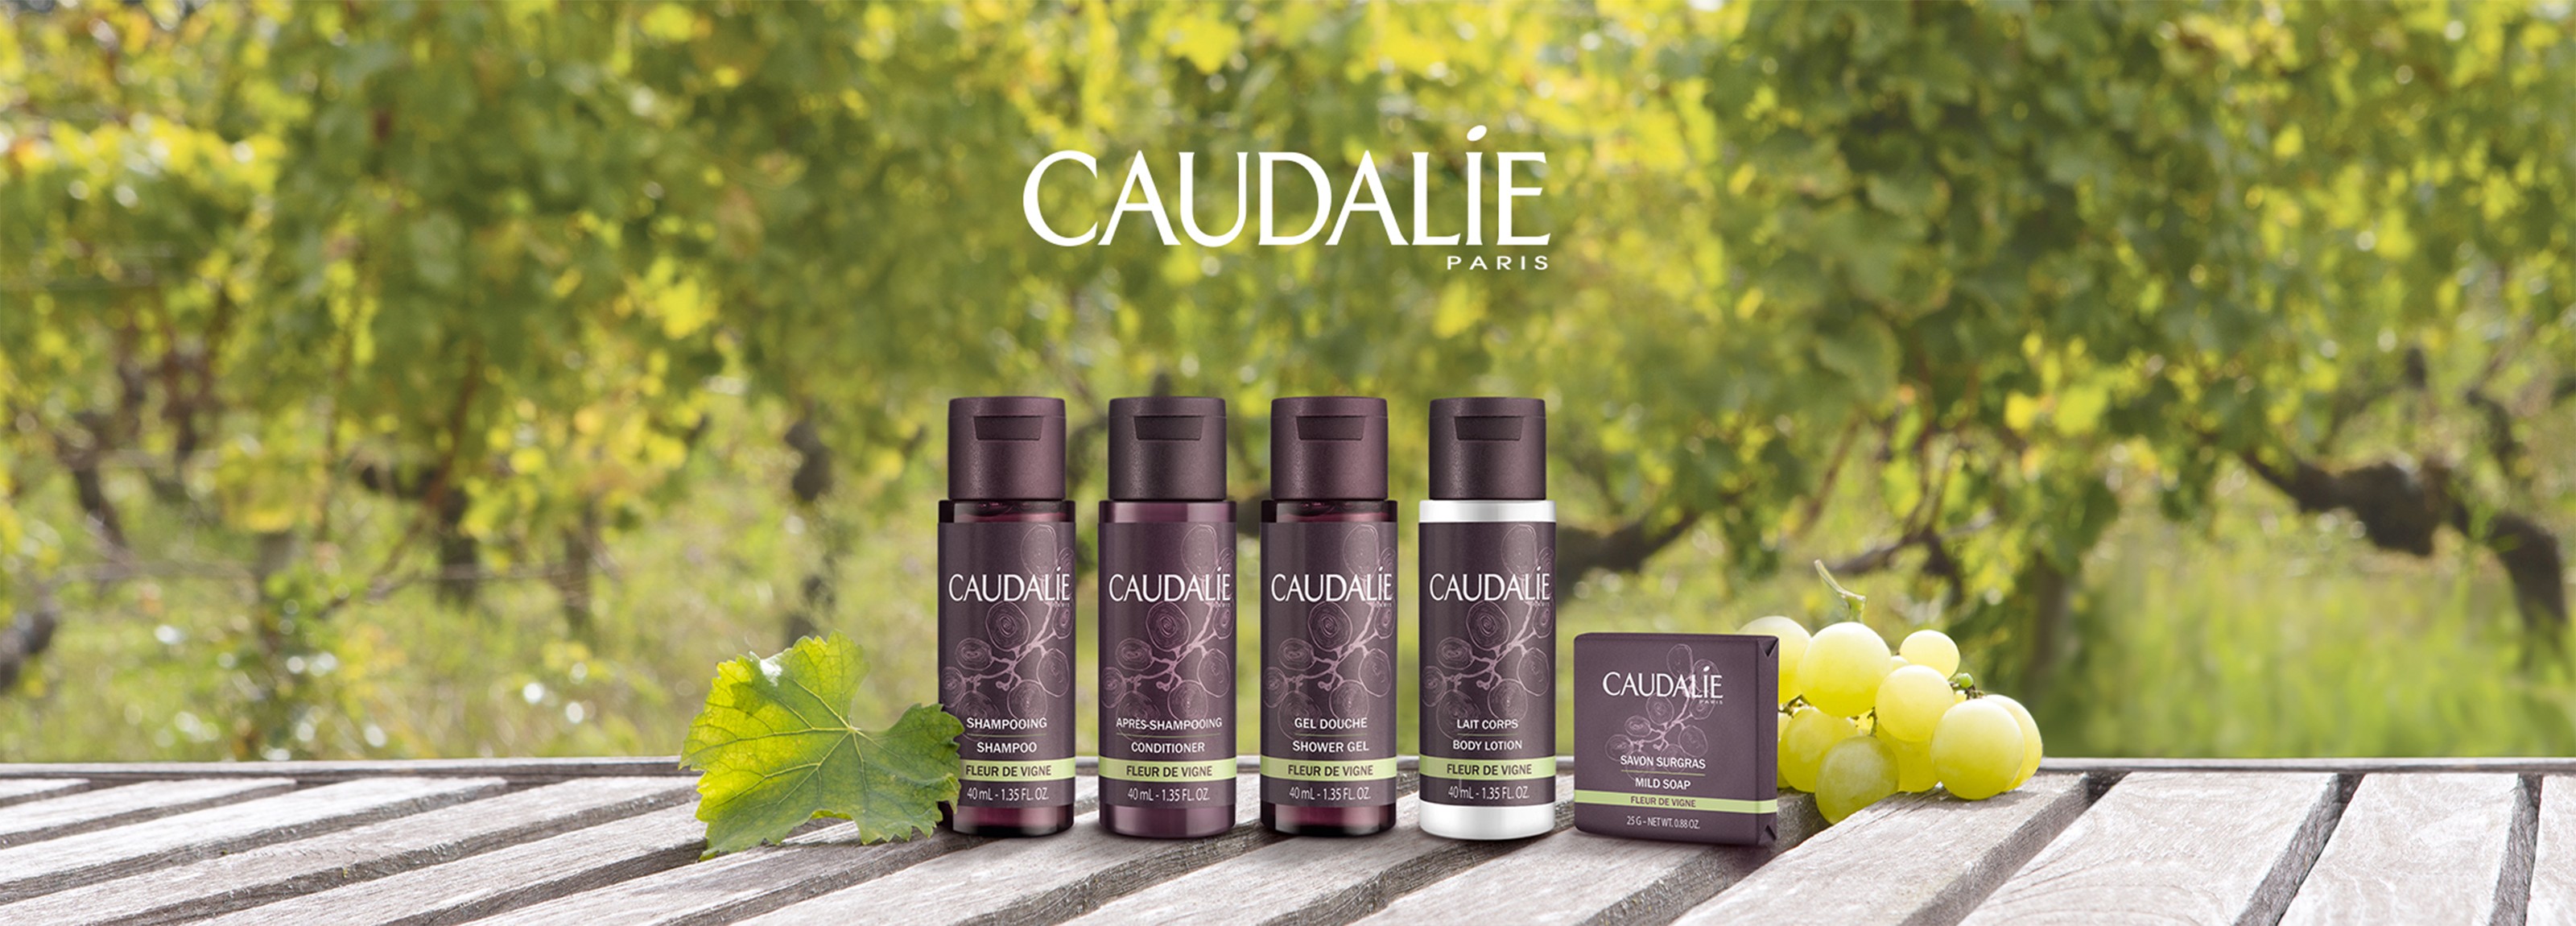 caudalie bathroom products and logo with grapes